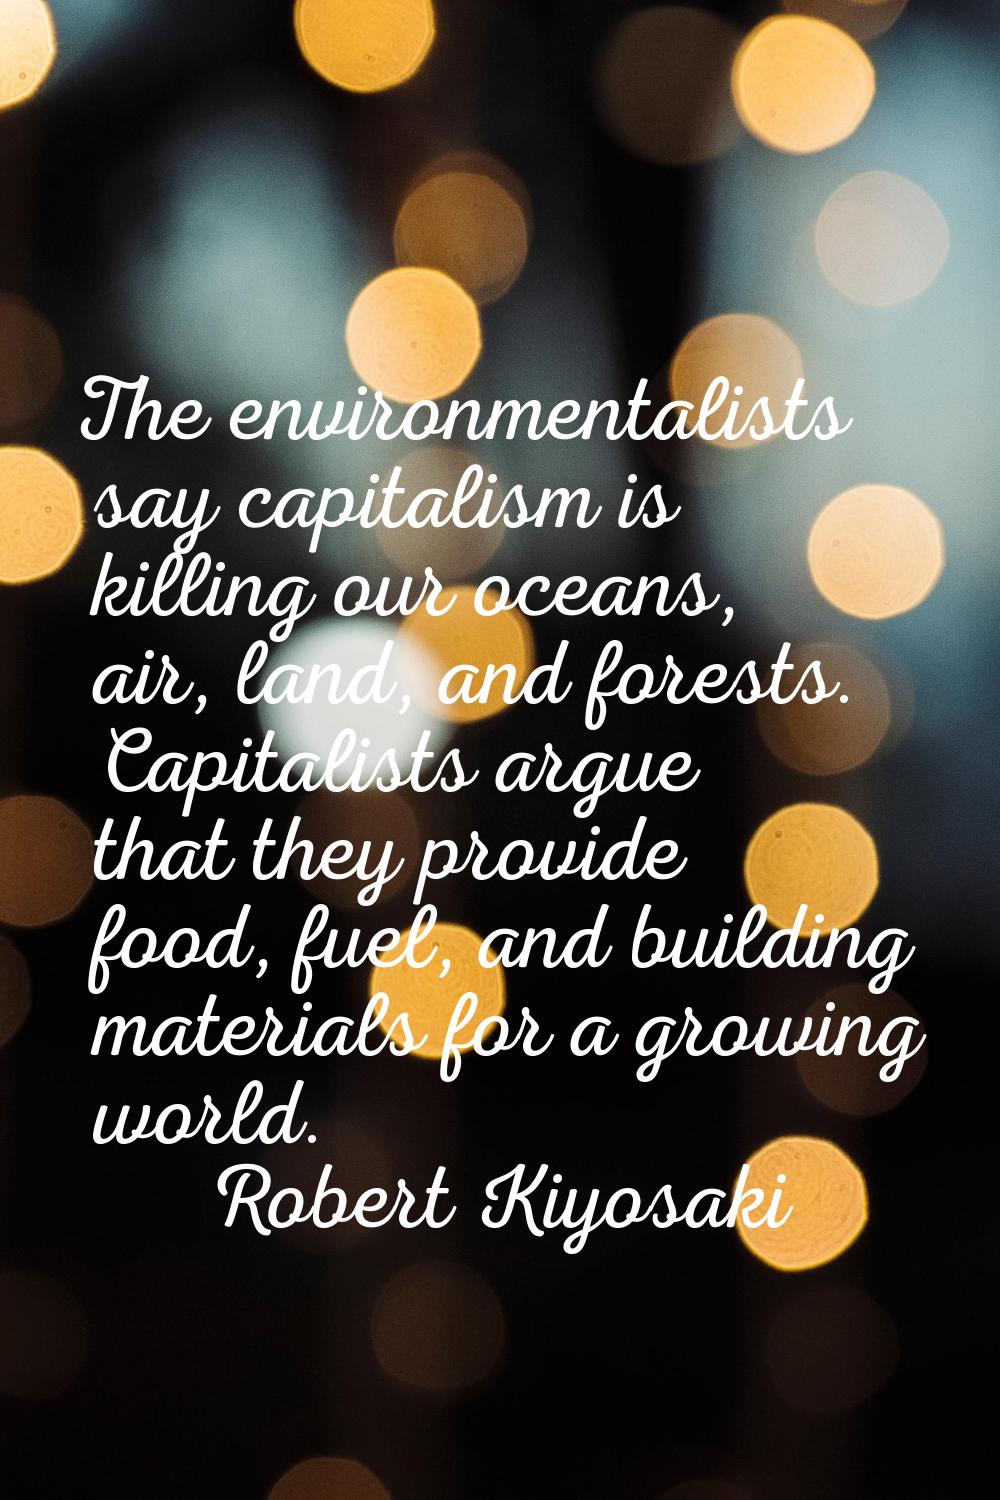 The environmentalists say capitalism is killing our oceans, air, land, and forests. Capitalists arg